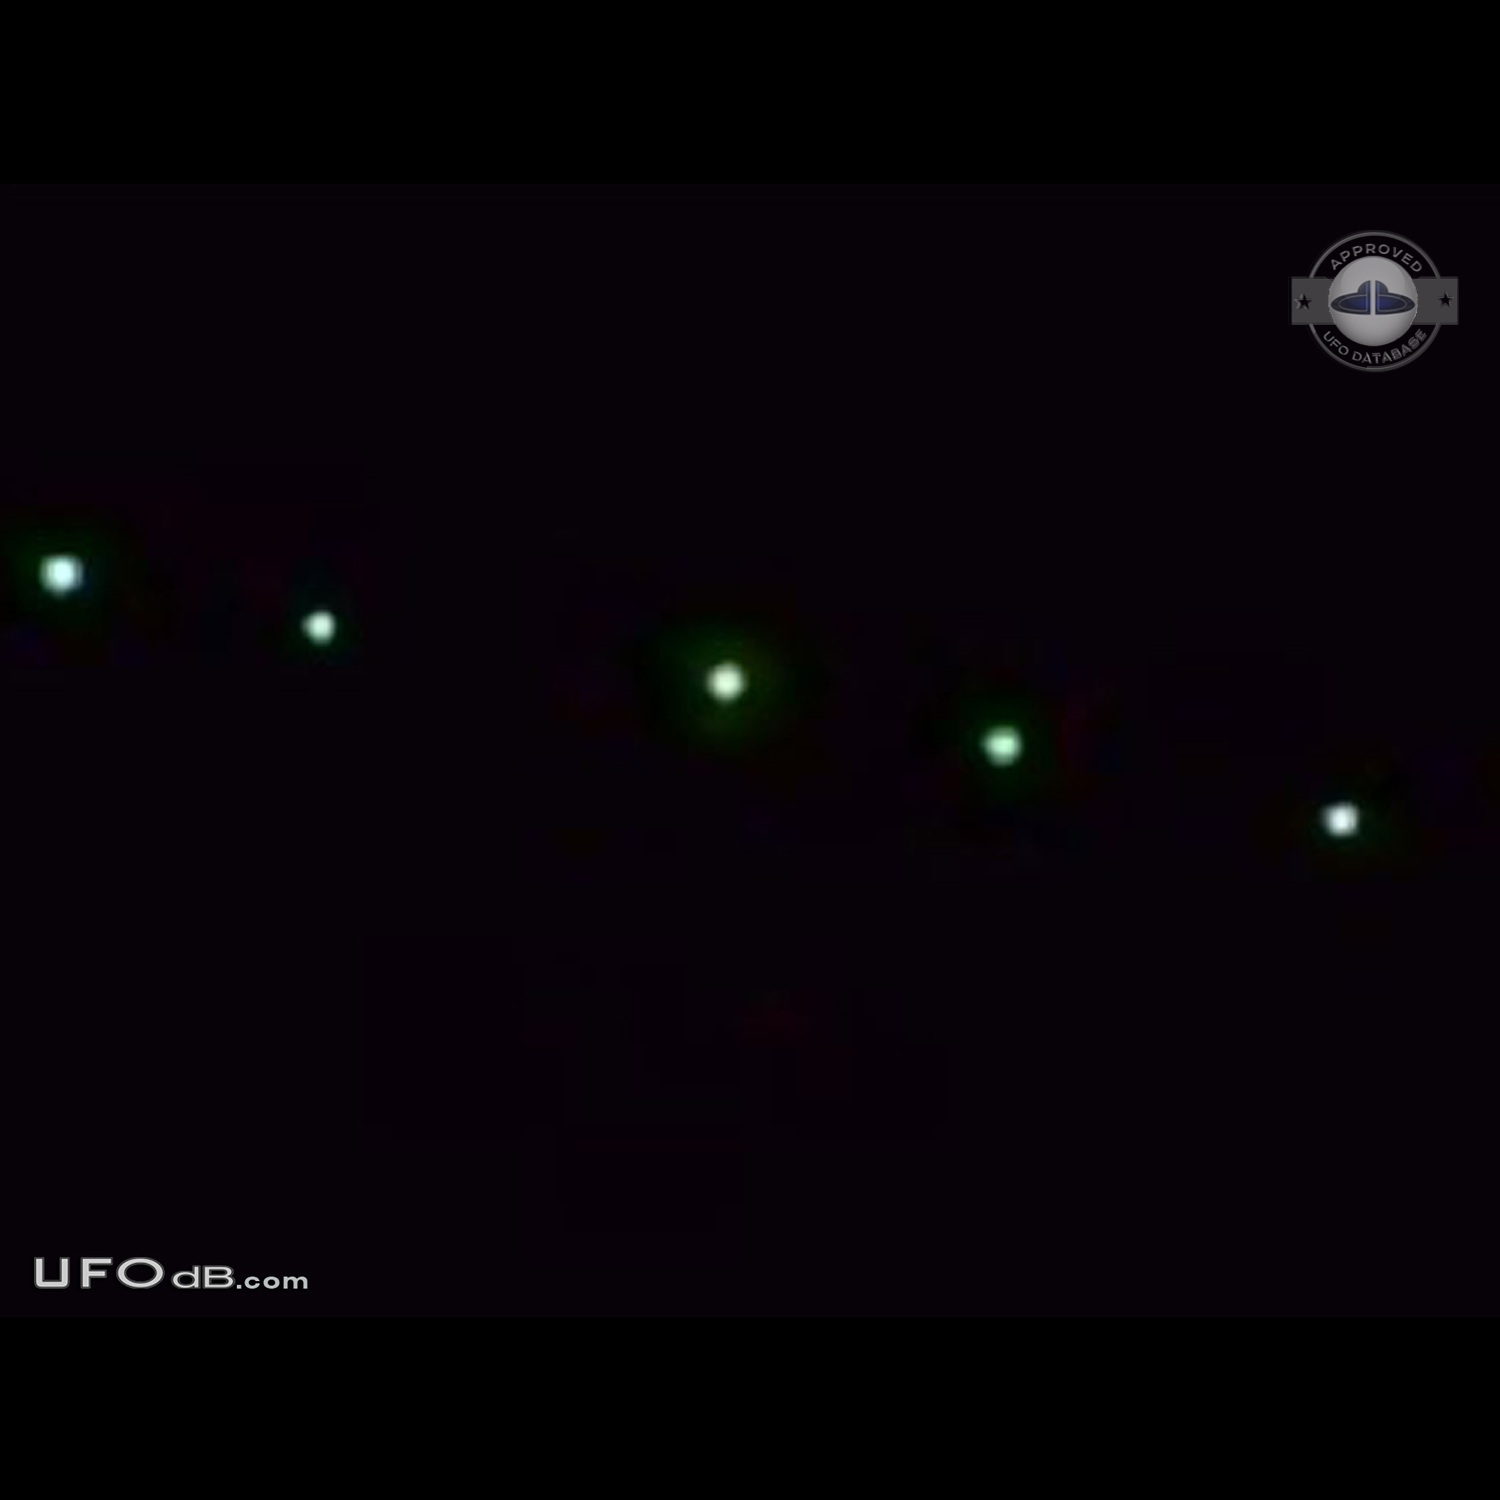 Fleet of 5 bright lights UFOs seen by many witnesses in Johannesburg UFO Picture #487-4